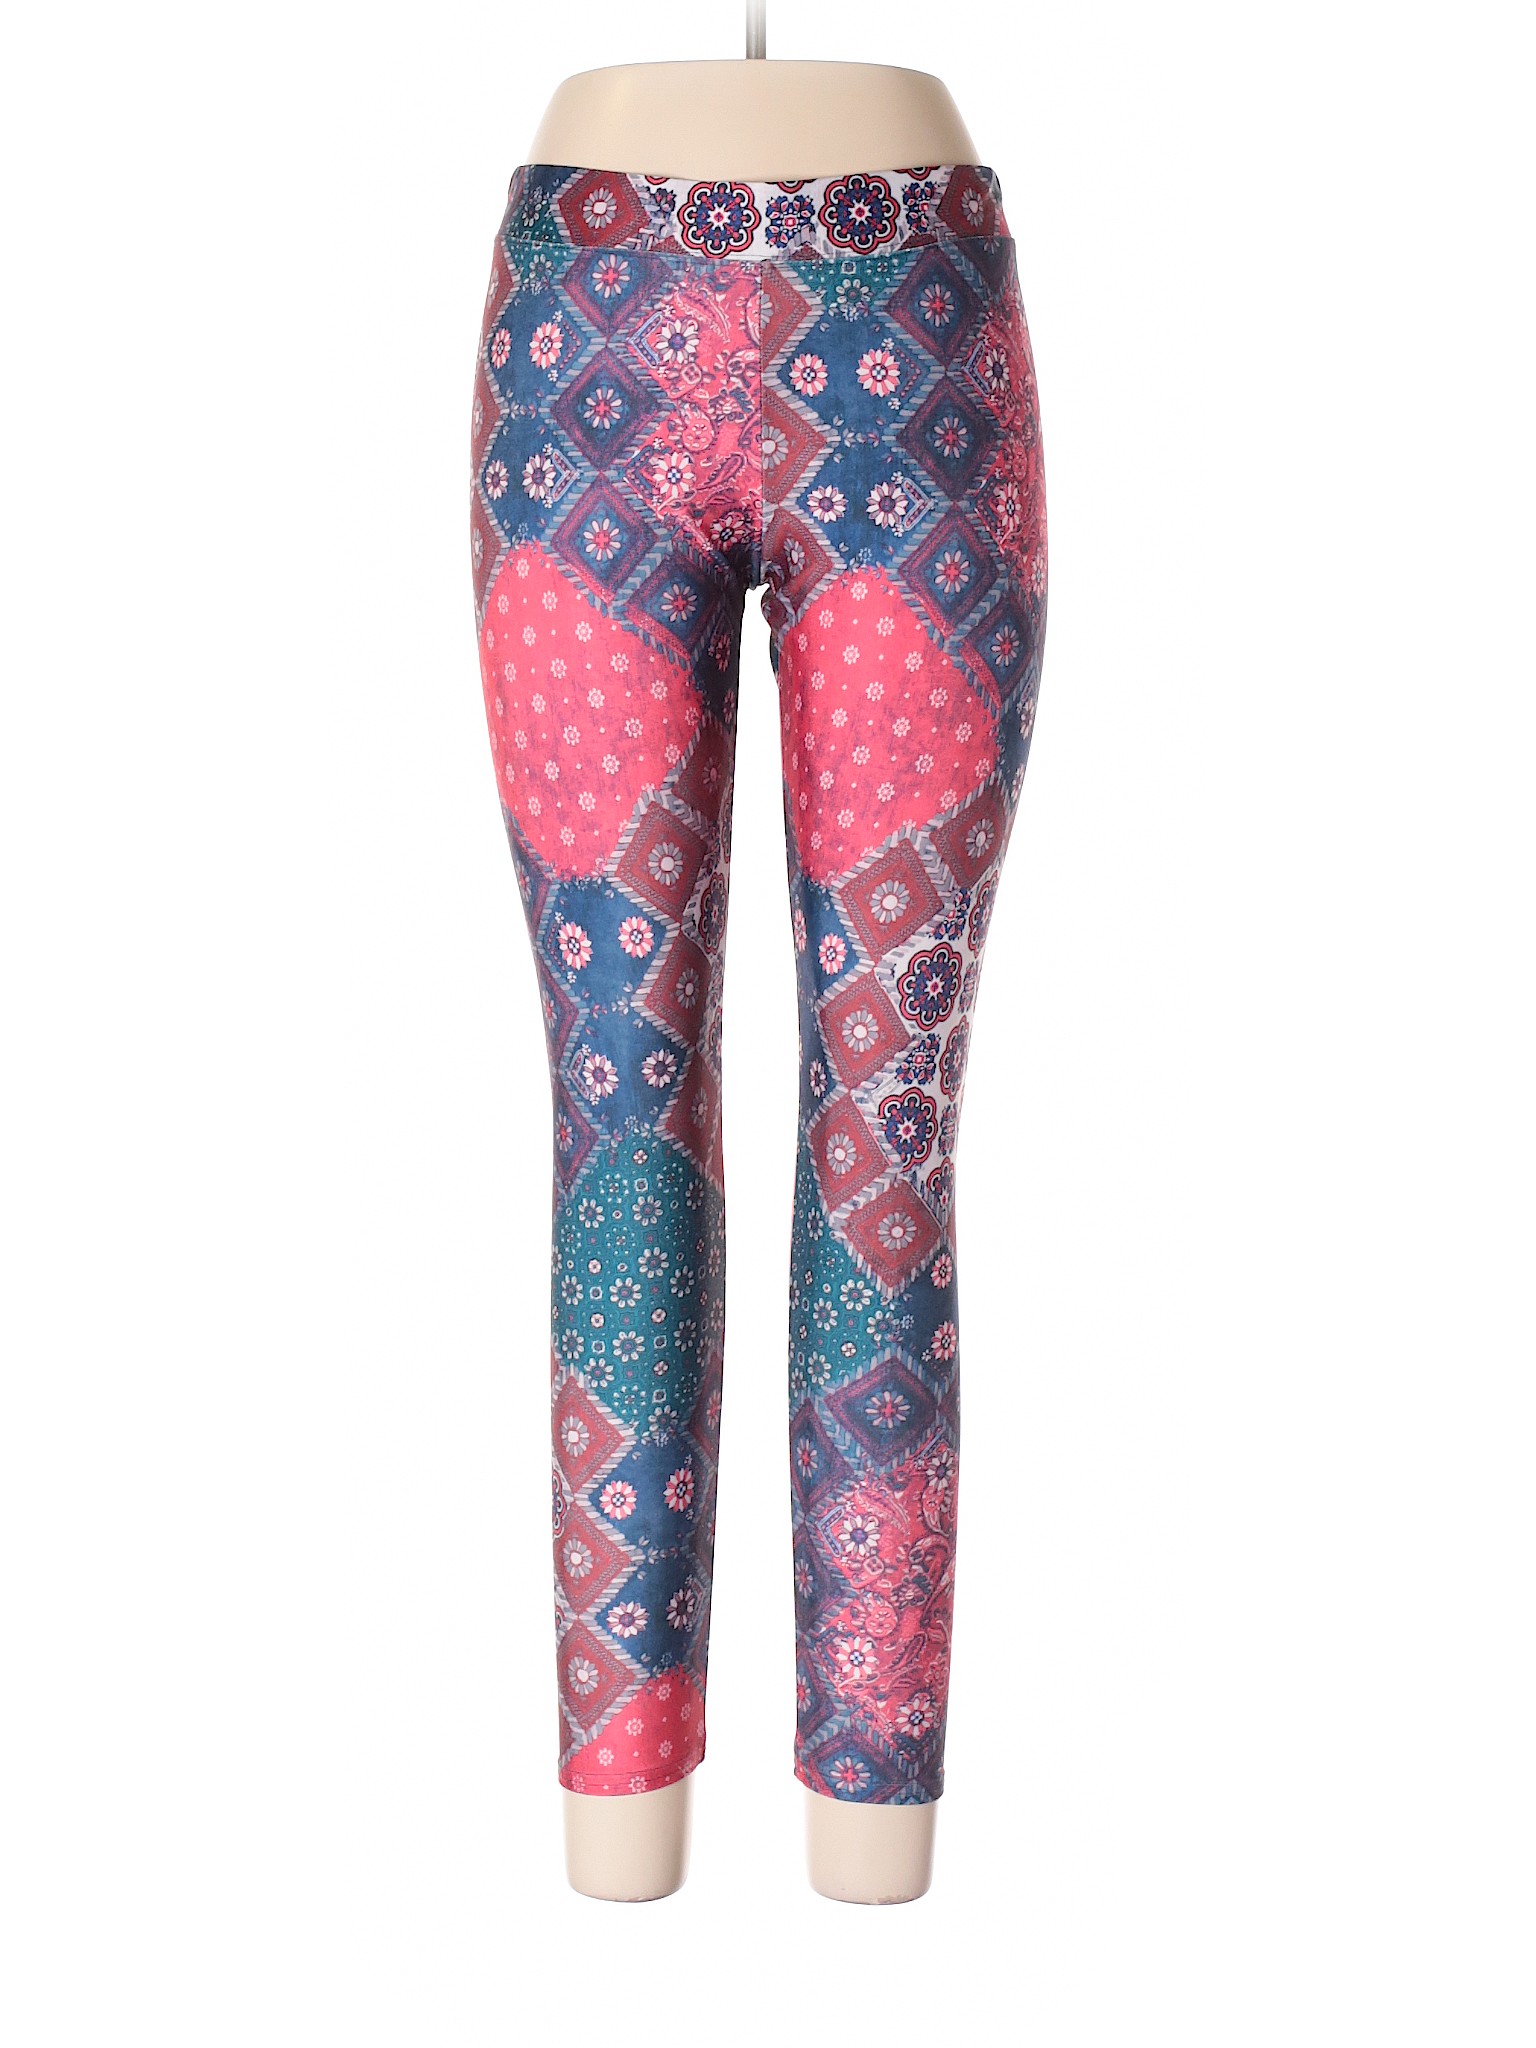 American Eagle Outfitters Print Pink Leggings Size L - 31% off | thredUP